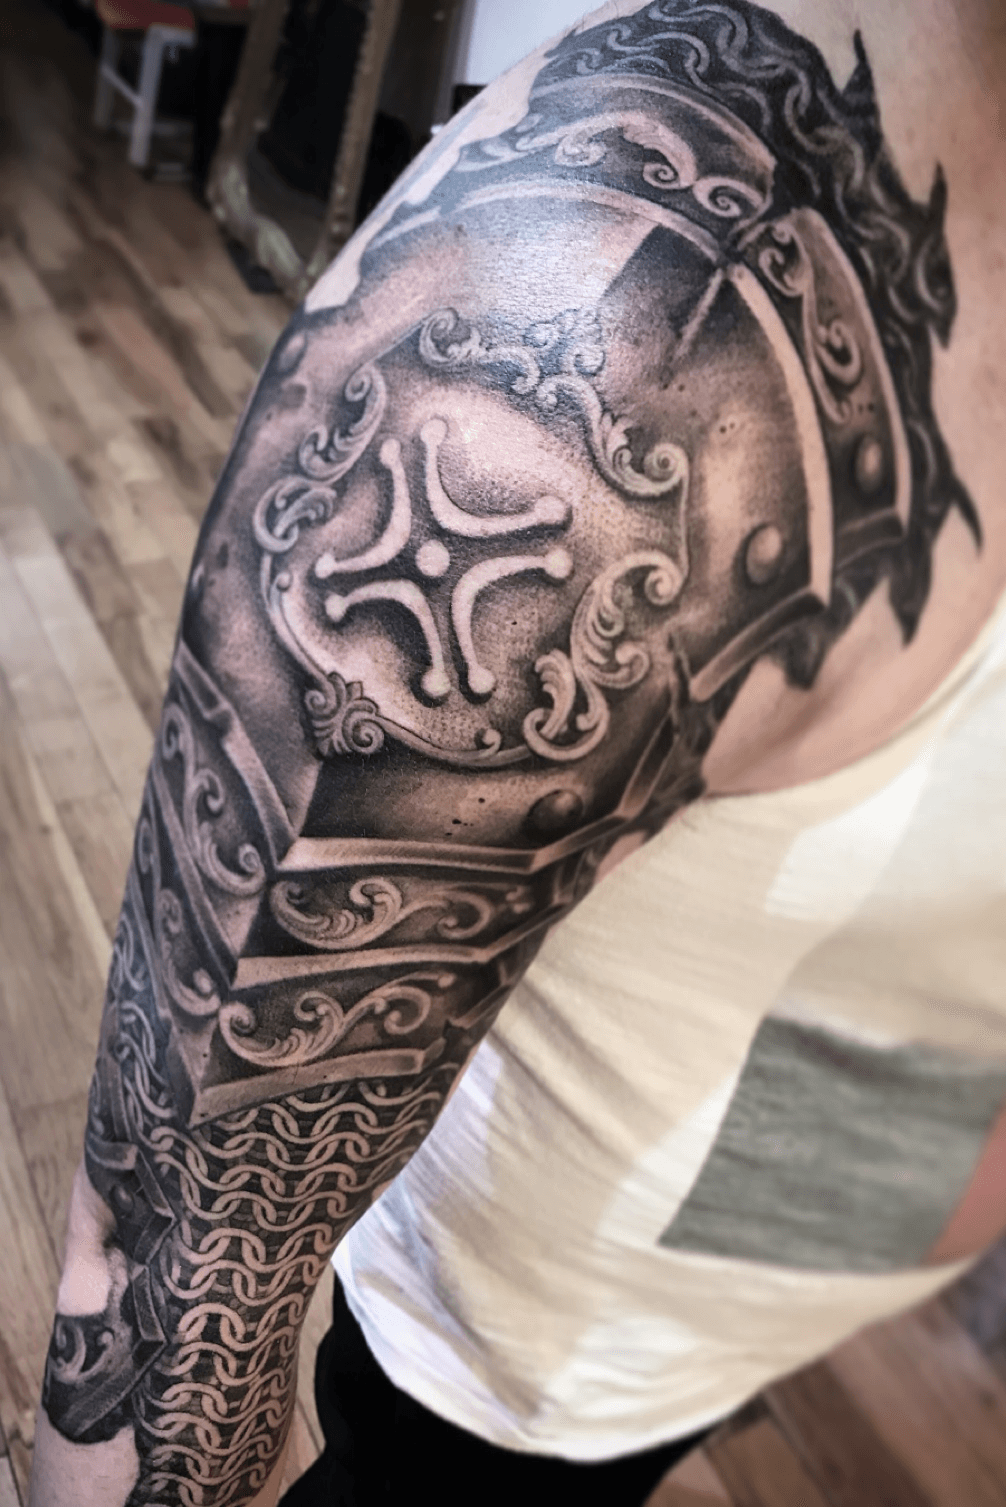 Tattoo with the image of chain mail or knight armor is very popular and  common among men Such a tattoo is masculine  VK